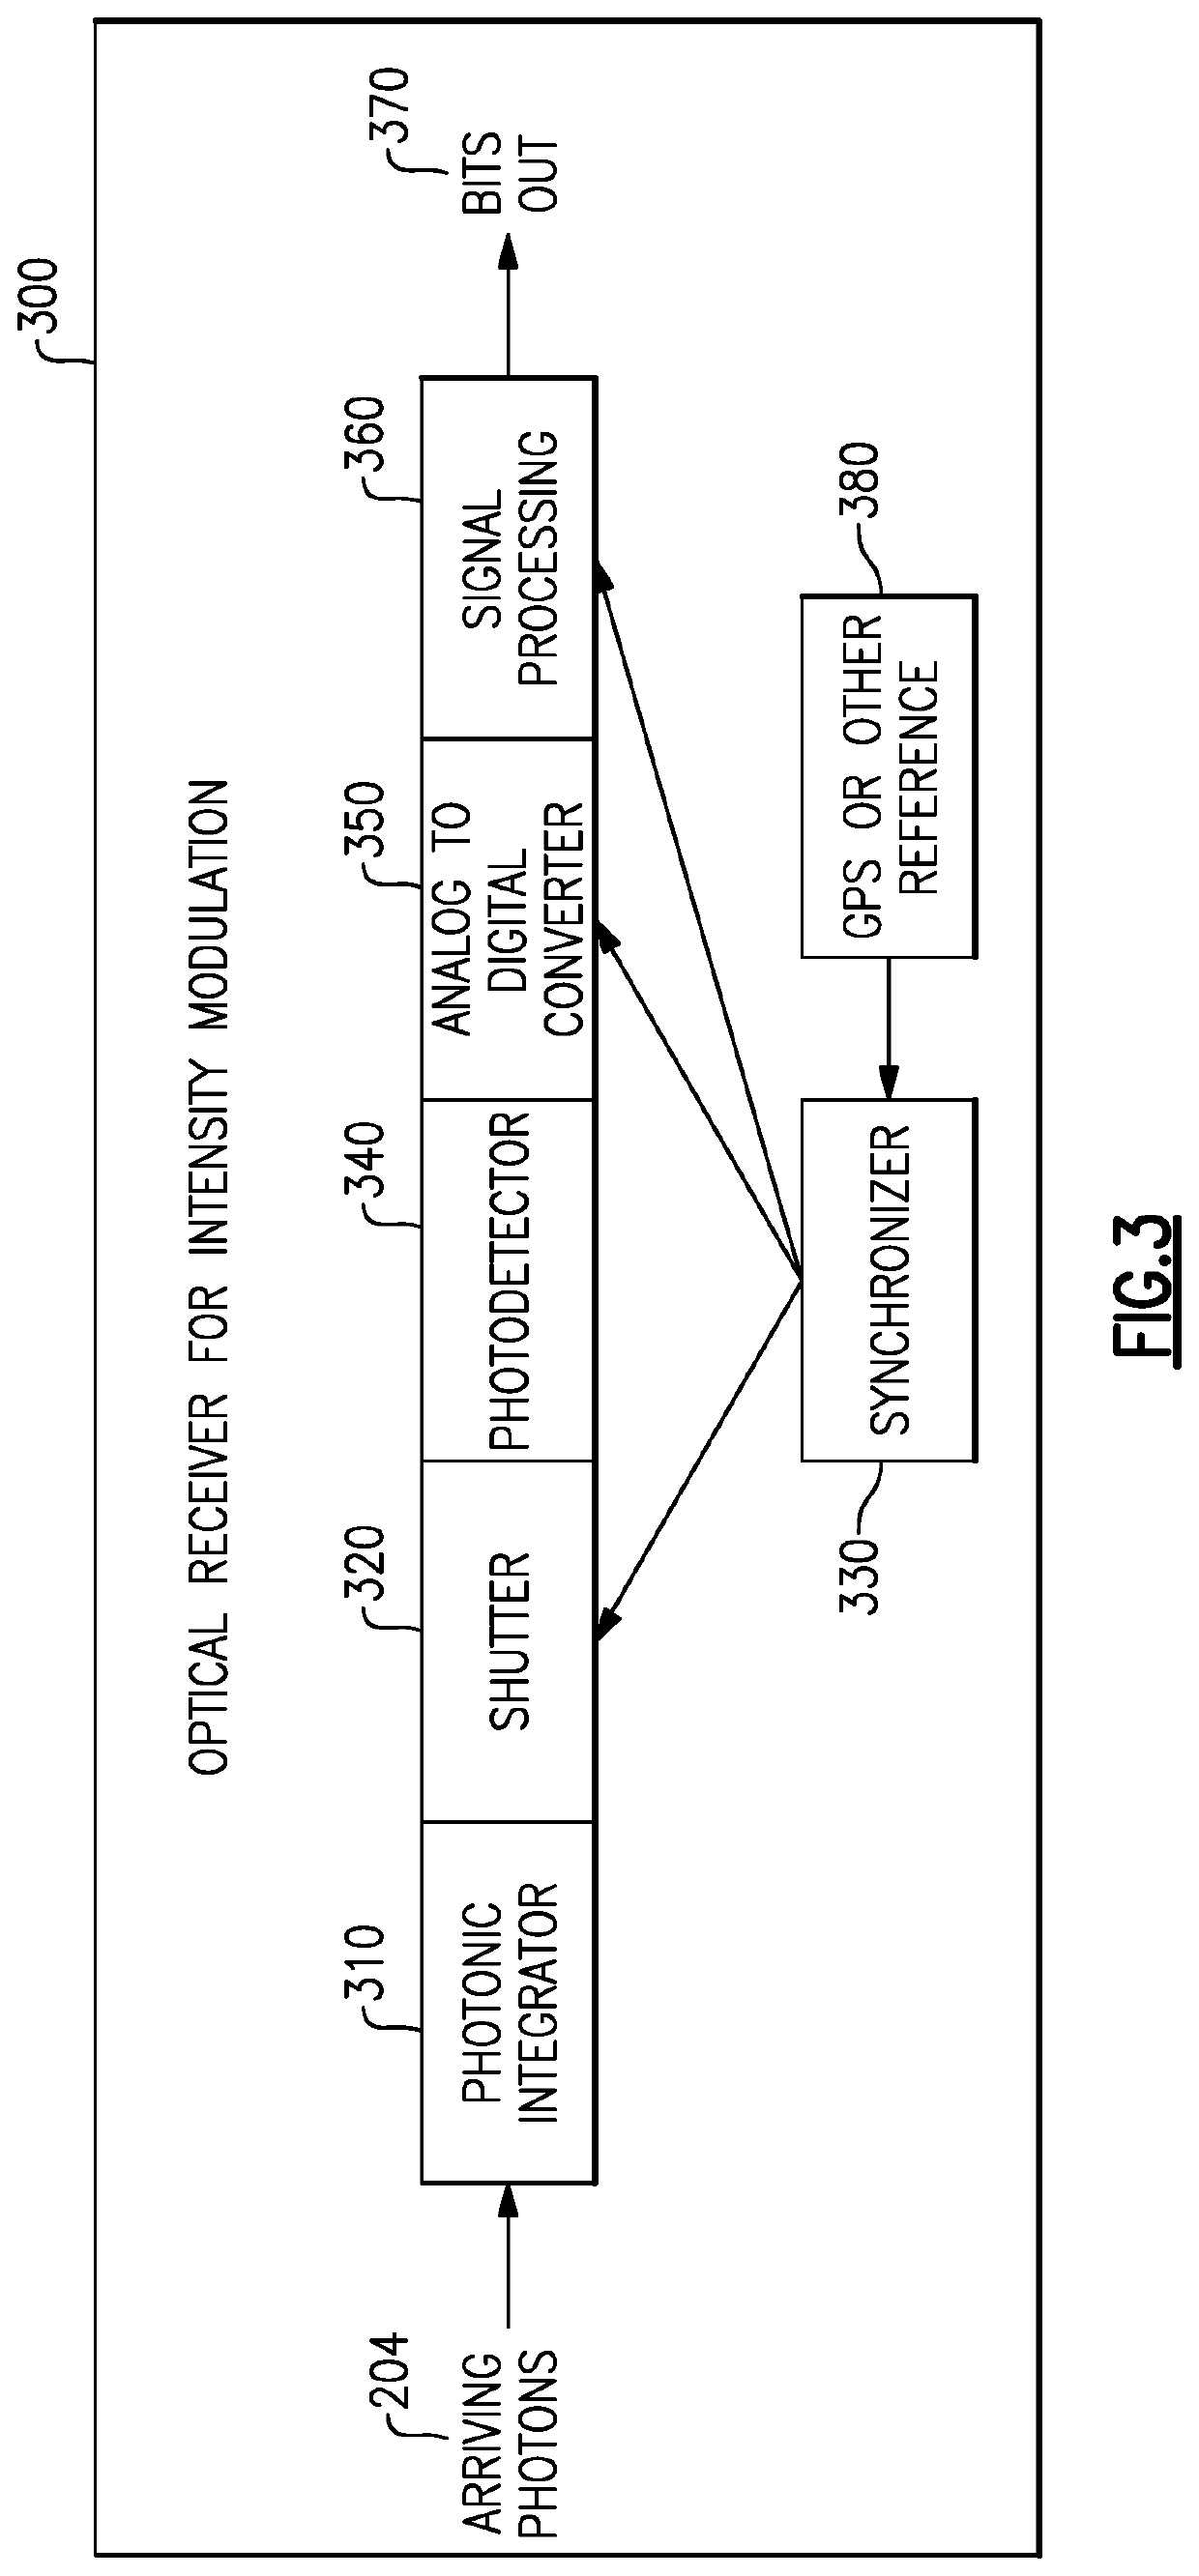 Methods and apparatus for transmission of low photon density optical signals